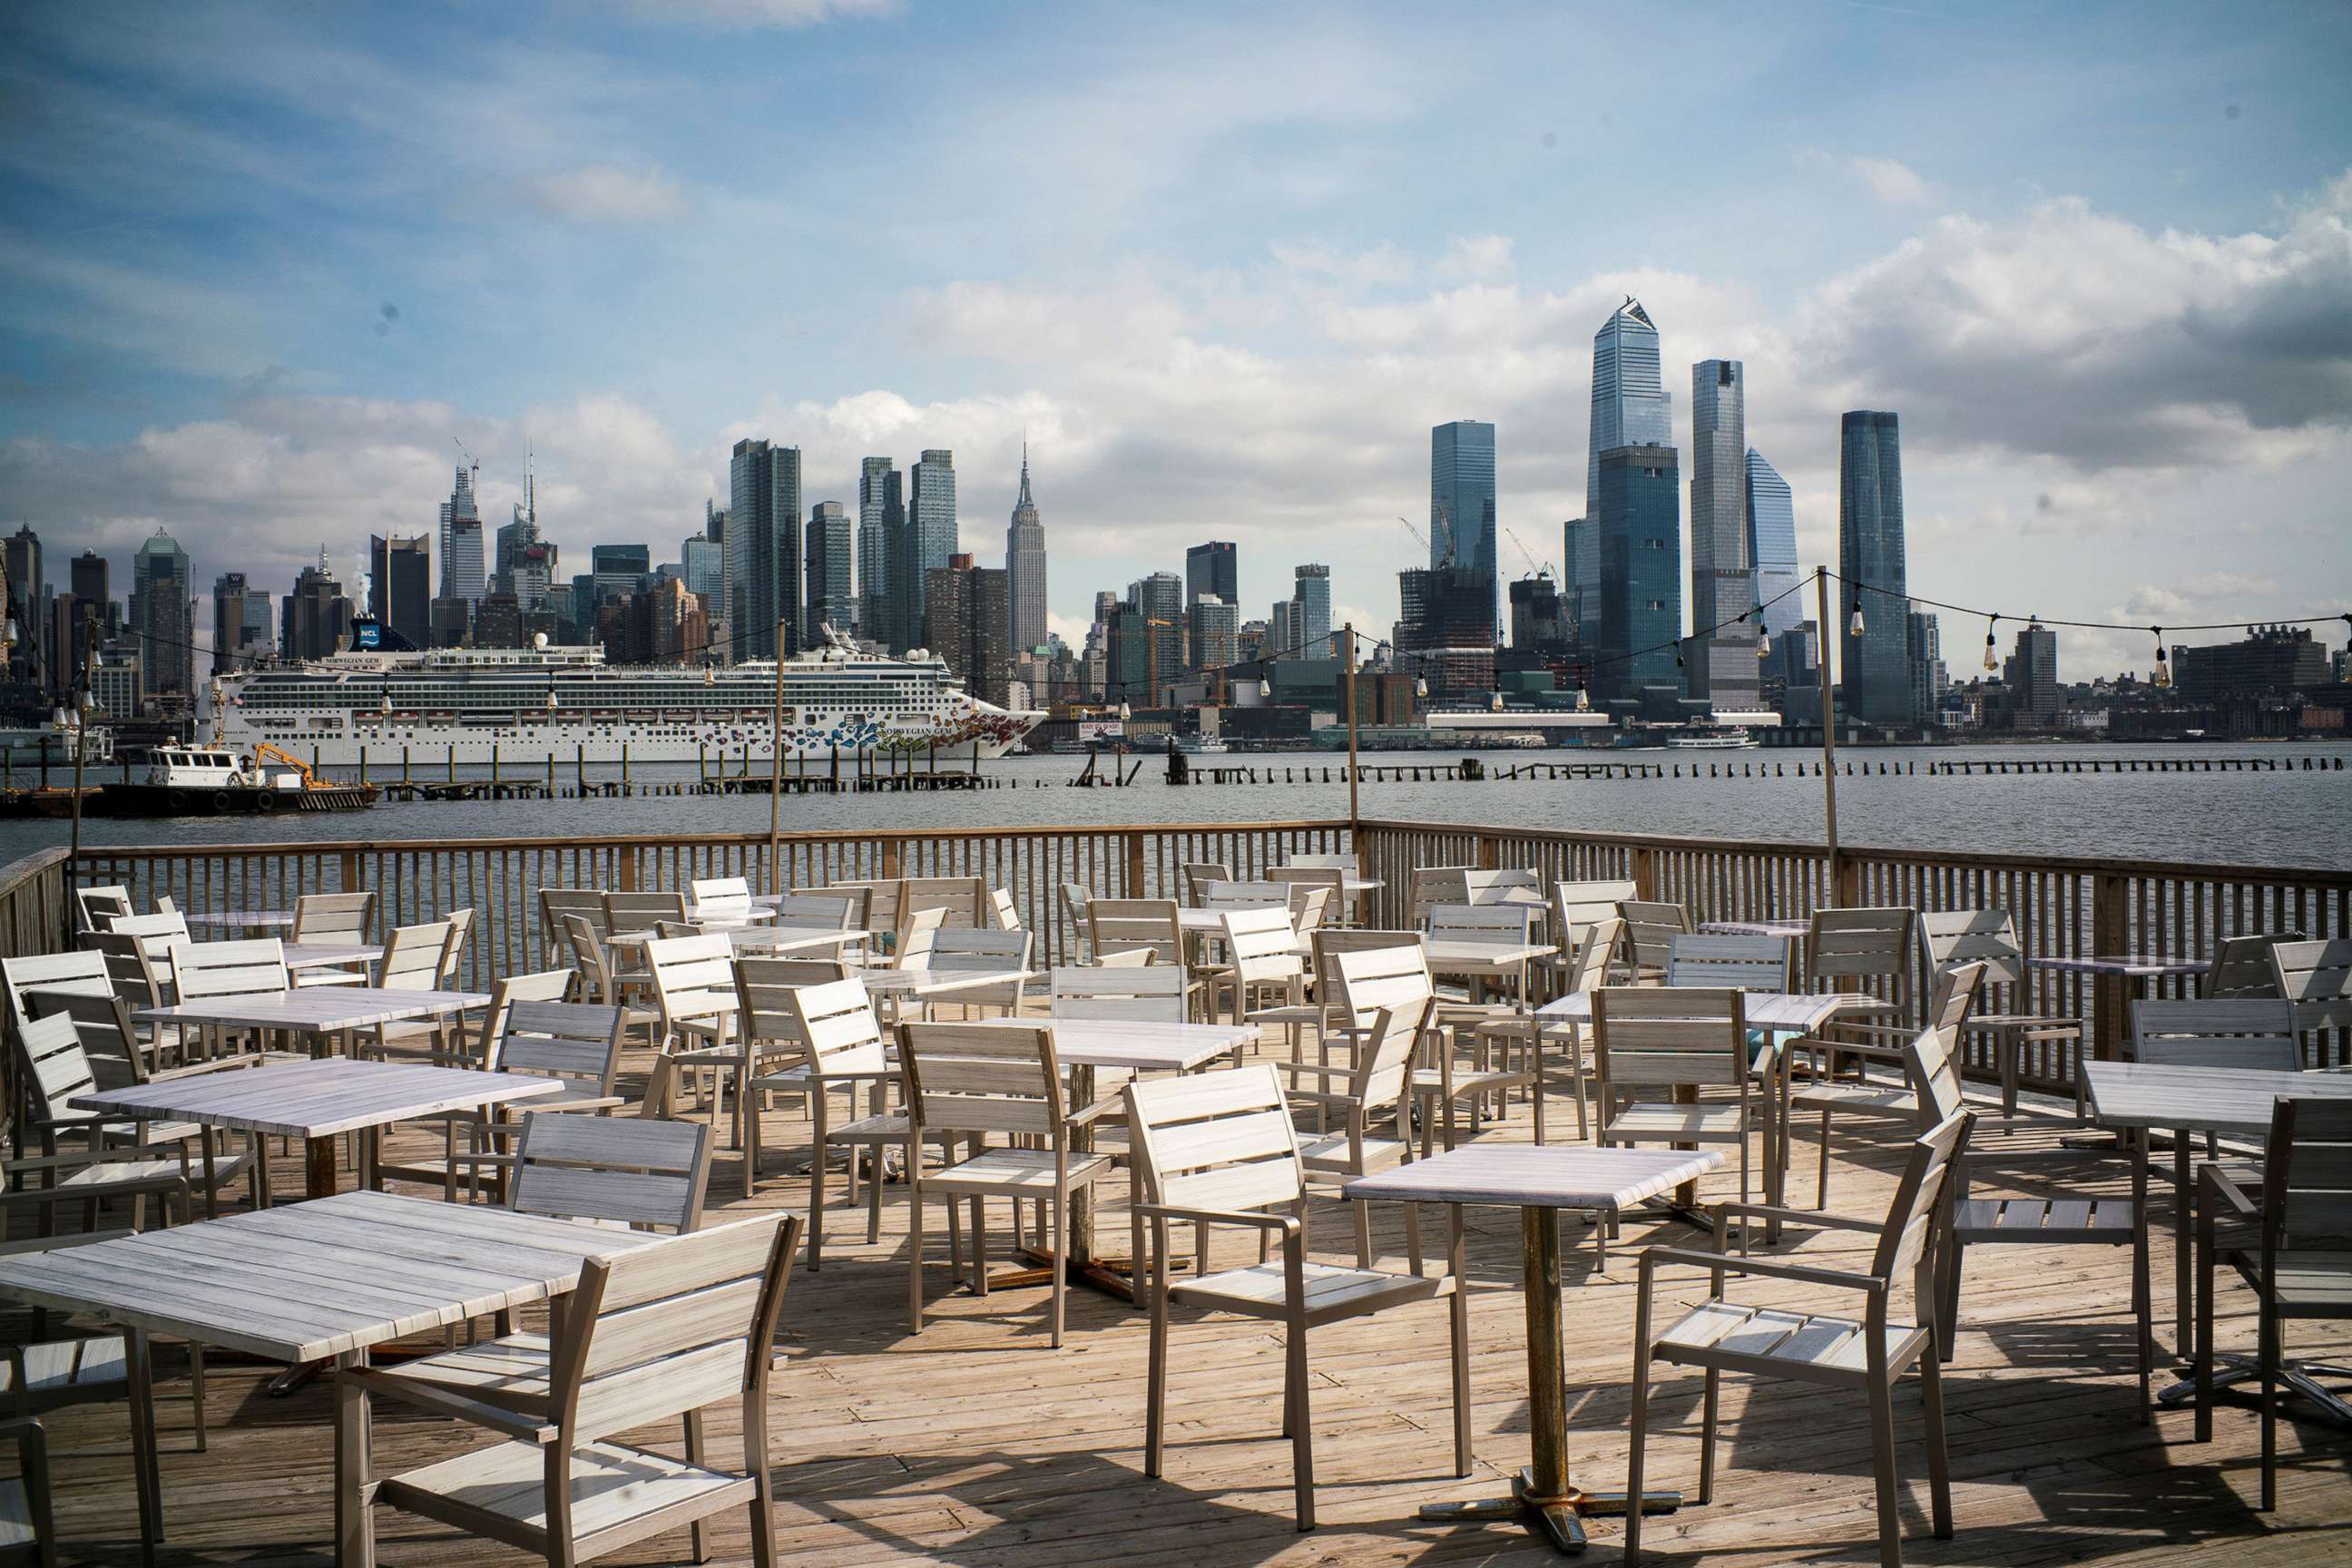 PHOTO: Empty chairs are seen at the deck of a local restaurant that is closed due to the outbreak of coronavirus disease (COVID-19), in Hoboken, N.J., March 16, 2020.